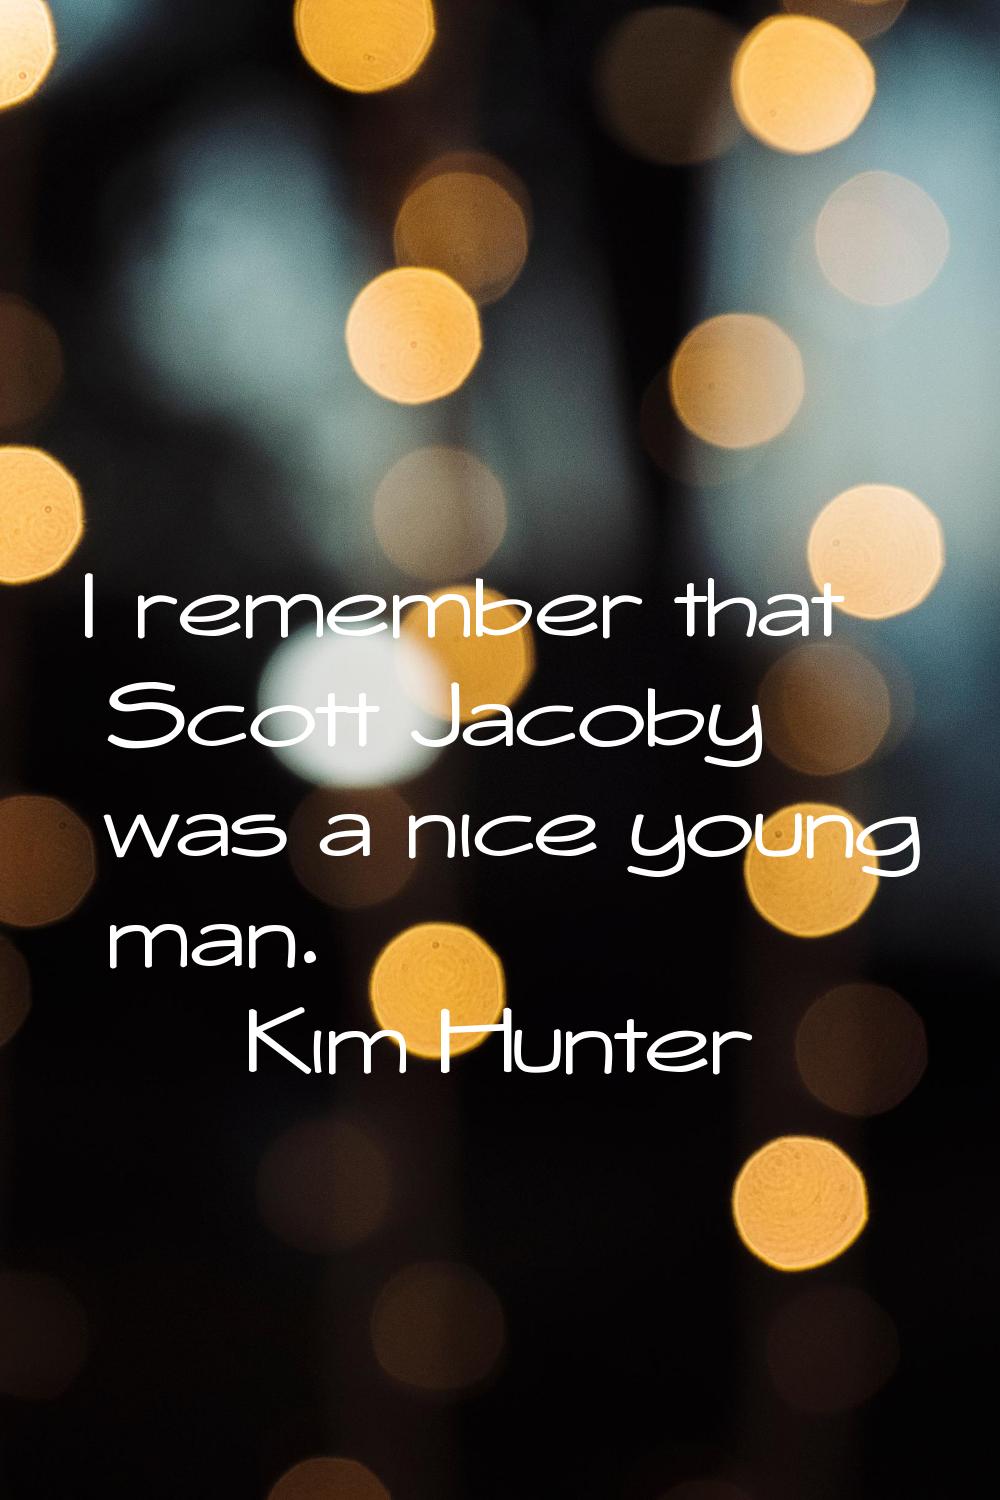 I remember that Scott Jacoby was a nice young man.